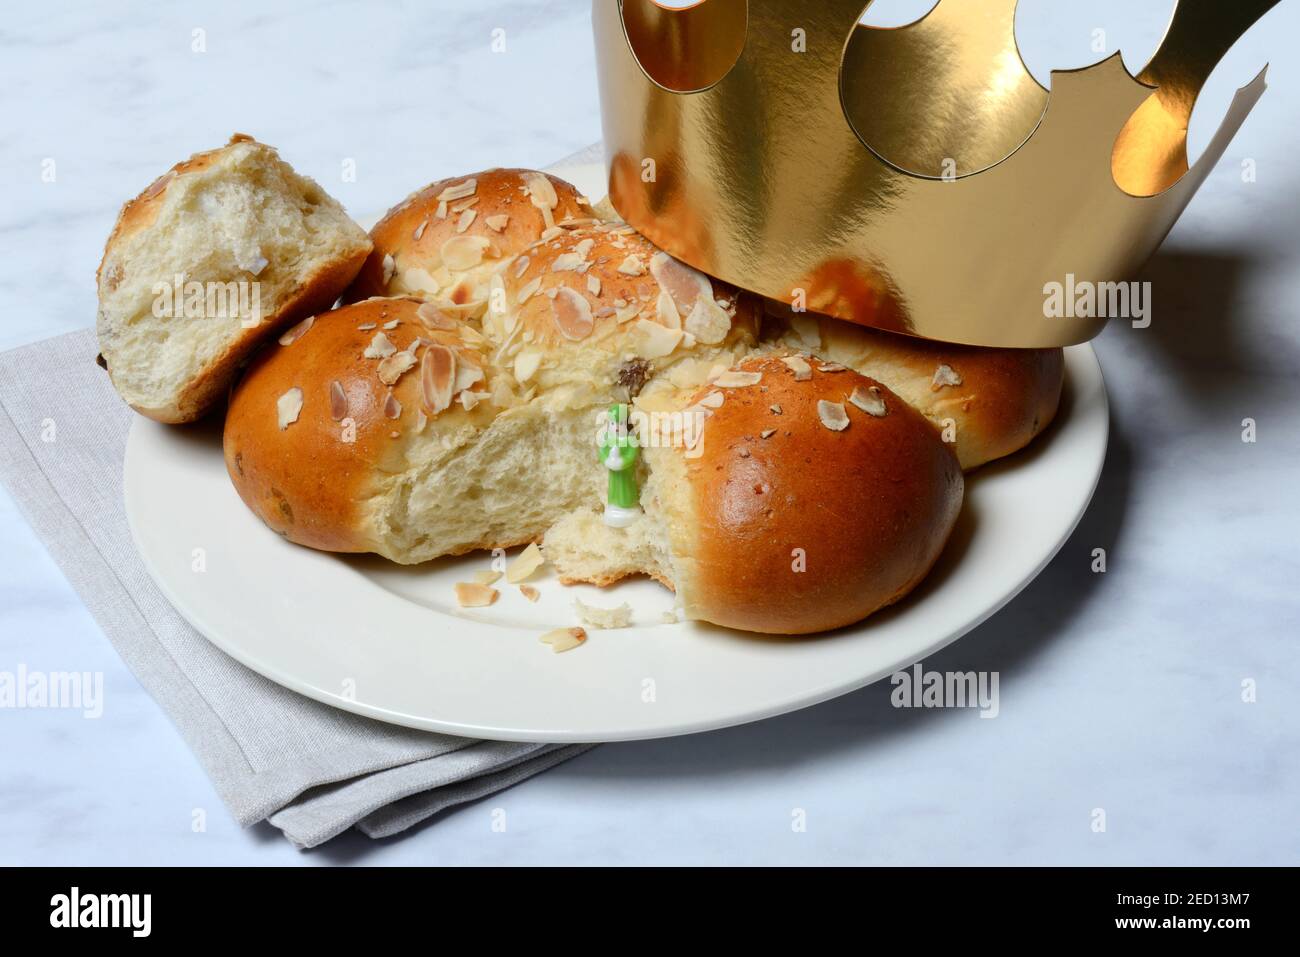 Epiphany cake with king and crown, Switzerland Stock Photo